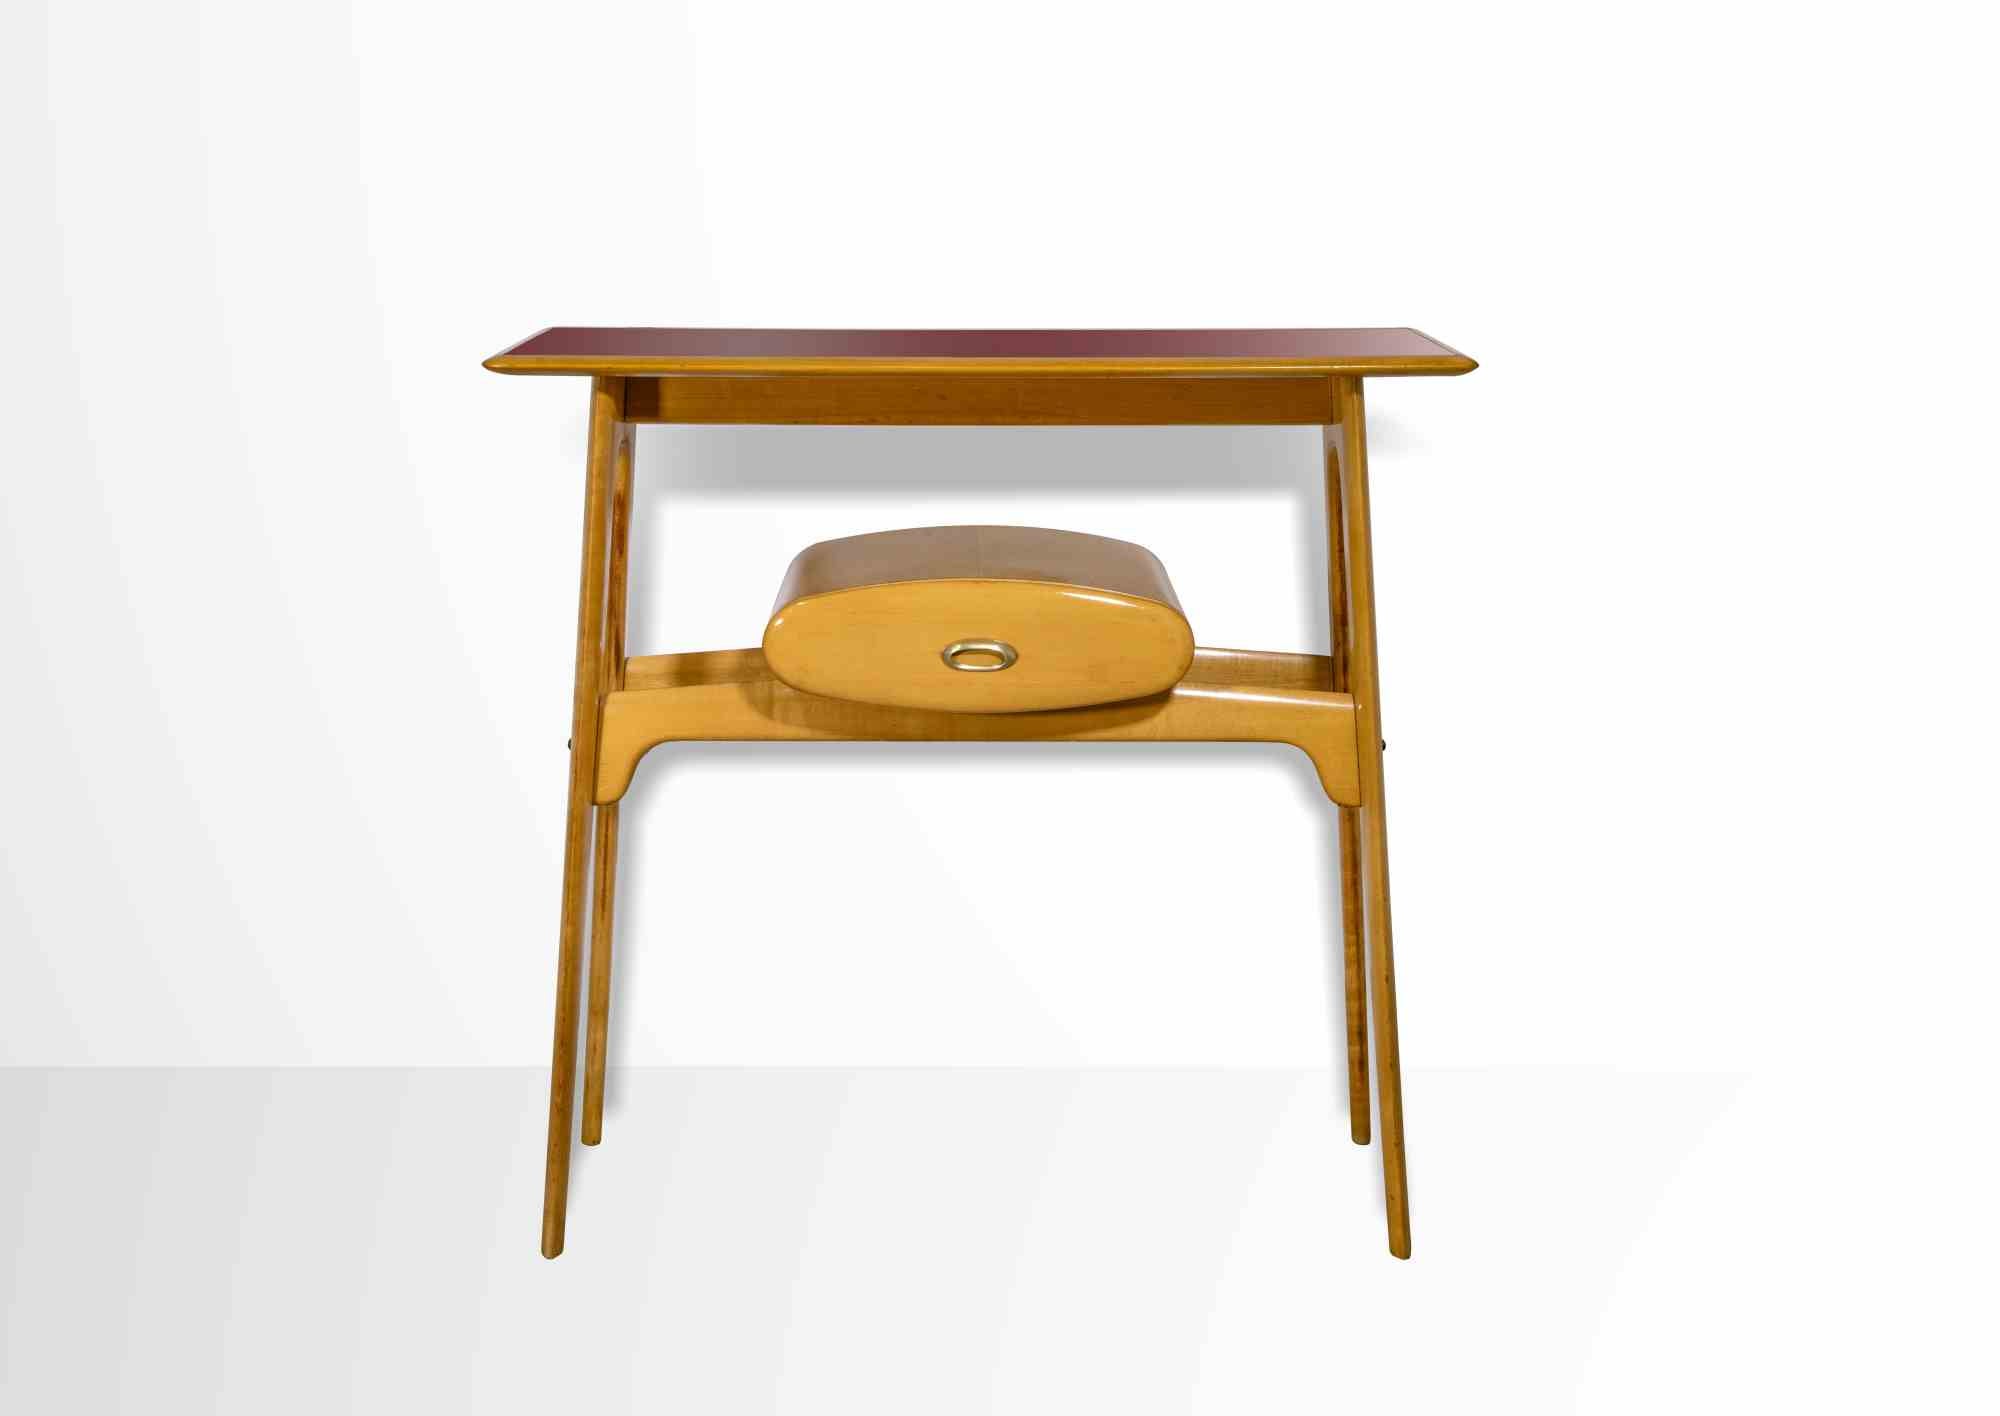 Vintage Consolle is a design item realized in the 1950s by Ignazio Gardella.

Wood and metal consolle.

Good conditions.